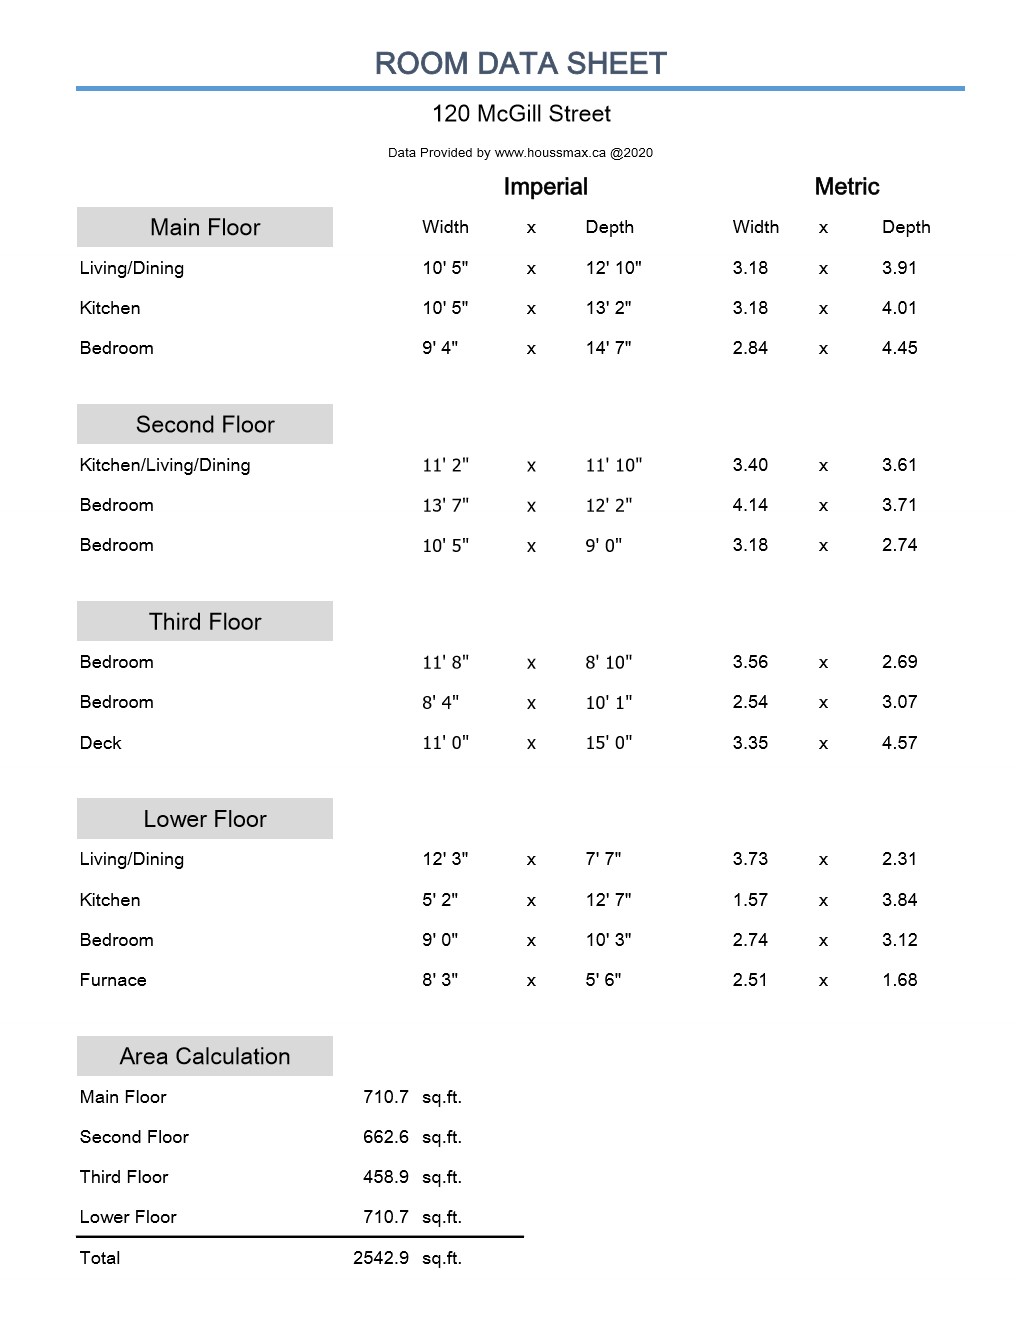 Measurements of various rooms in 120 McGill St.